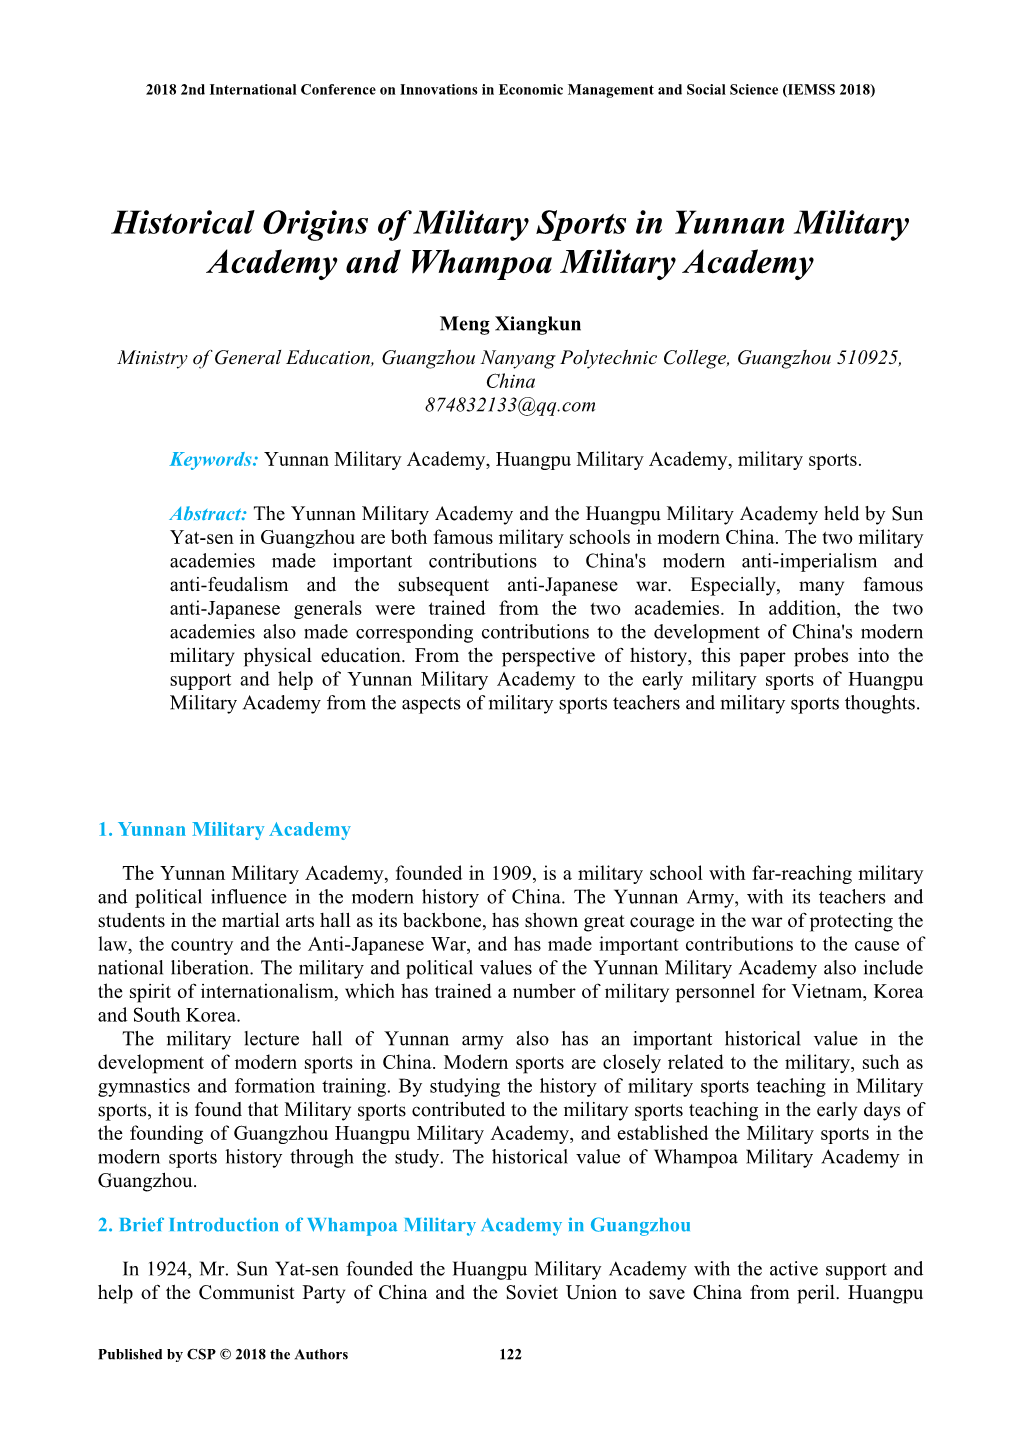 Historical Origins of Military Sports in Yunnan Military Academy and Whampoa Military Academy